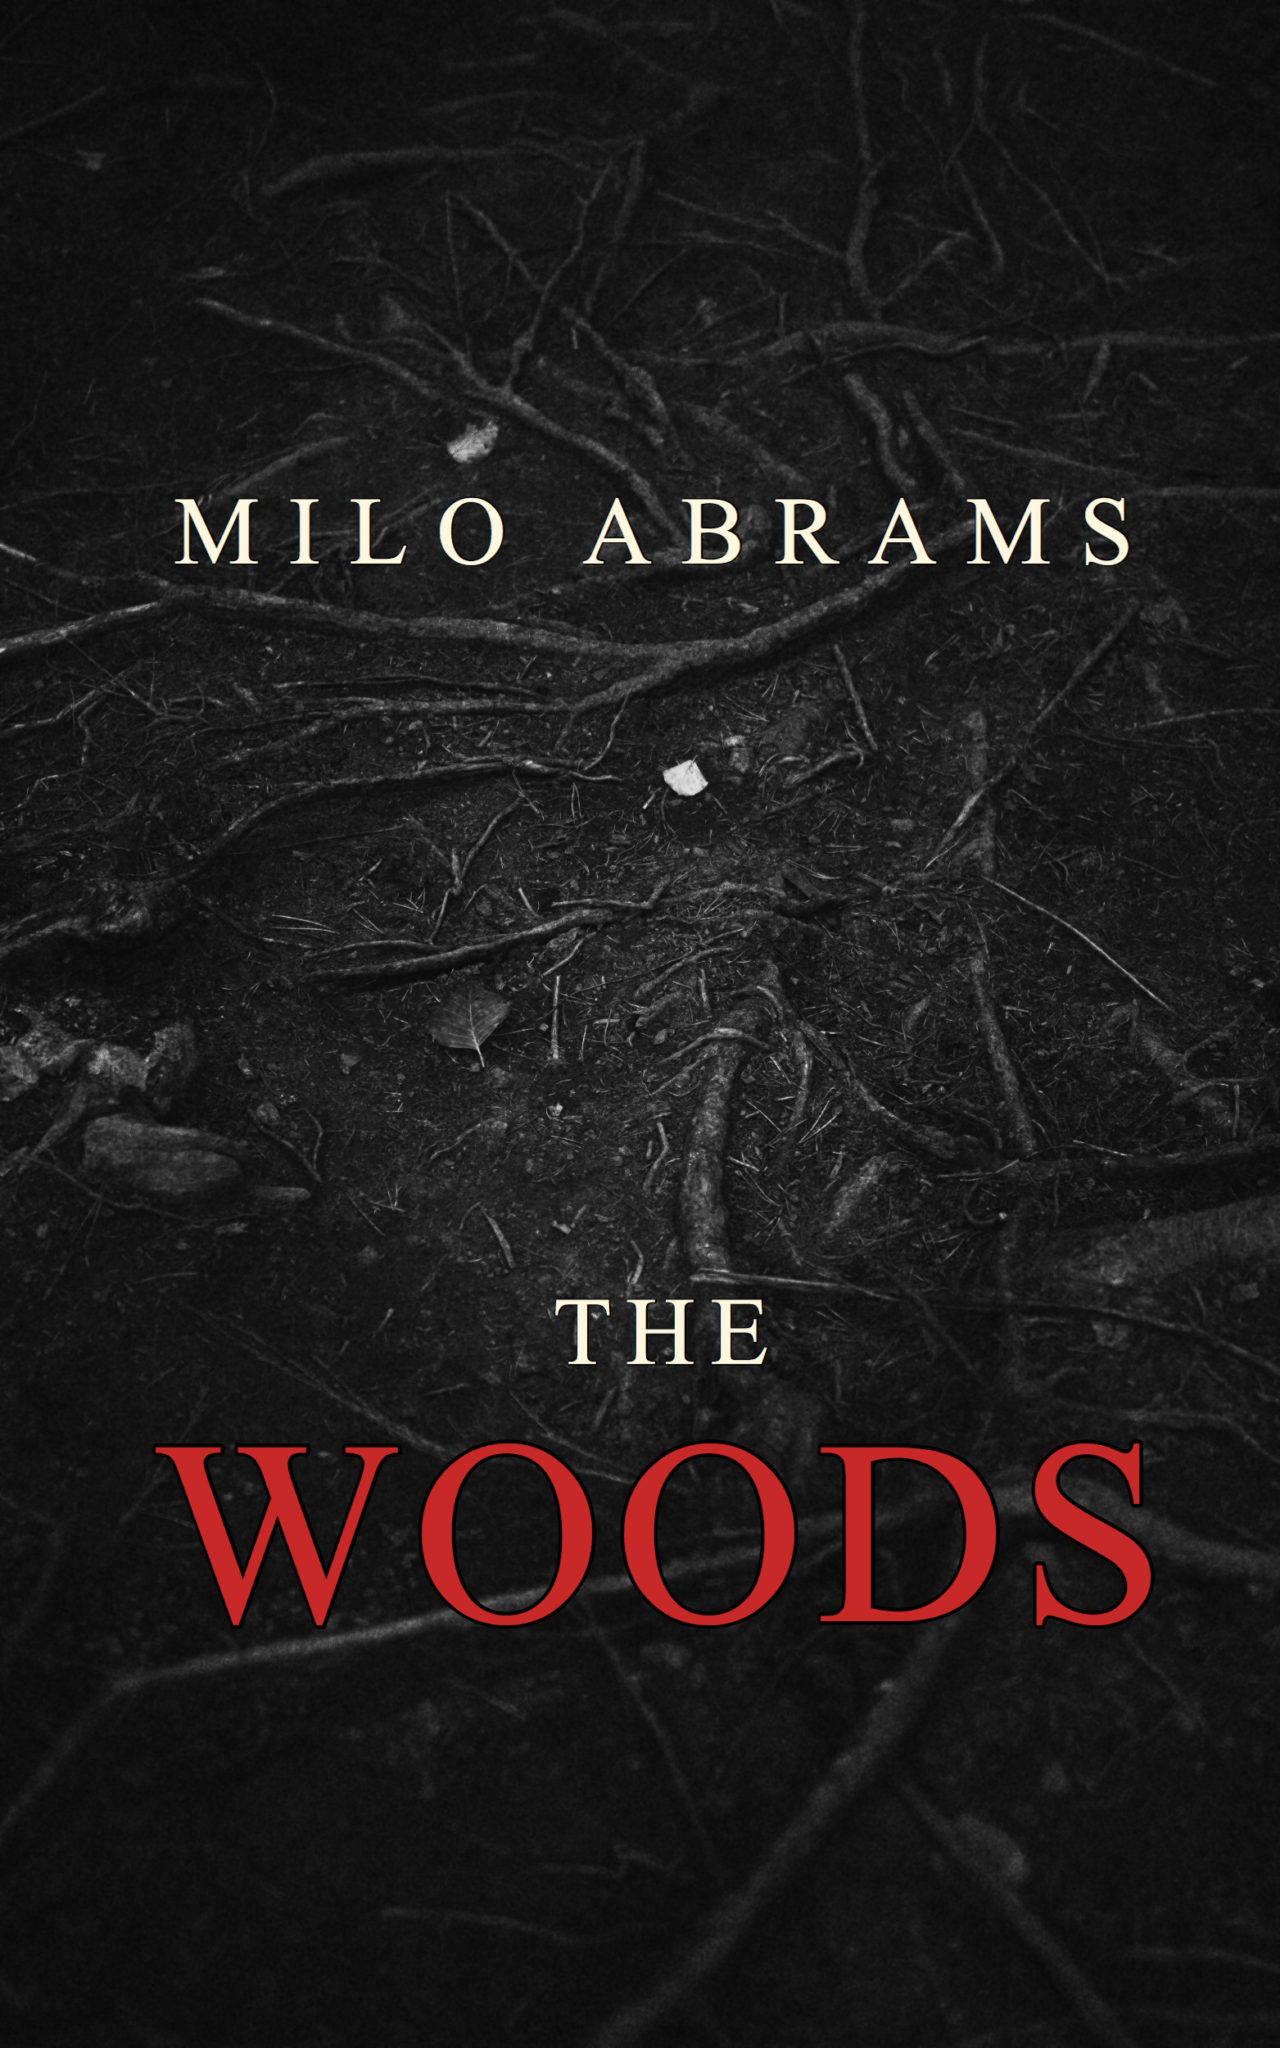 FREE: The Woods by Milo Abrams